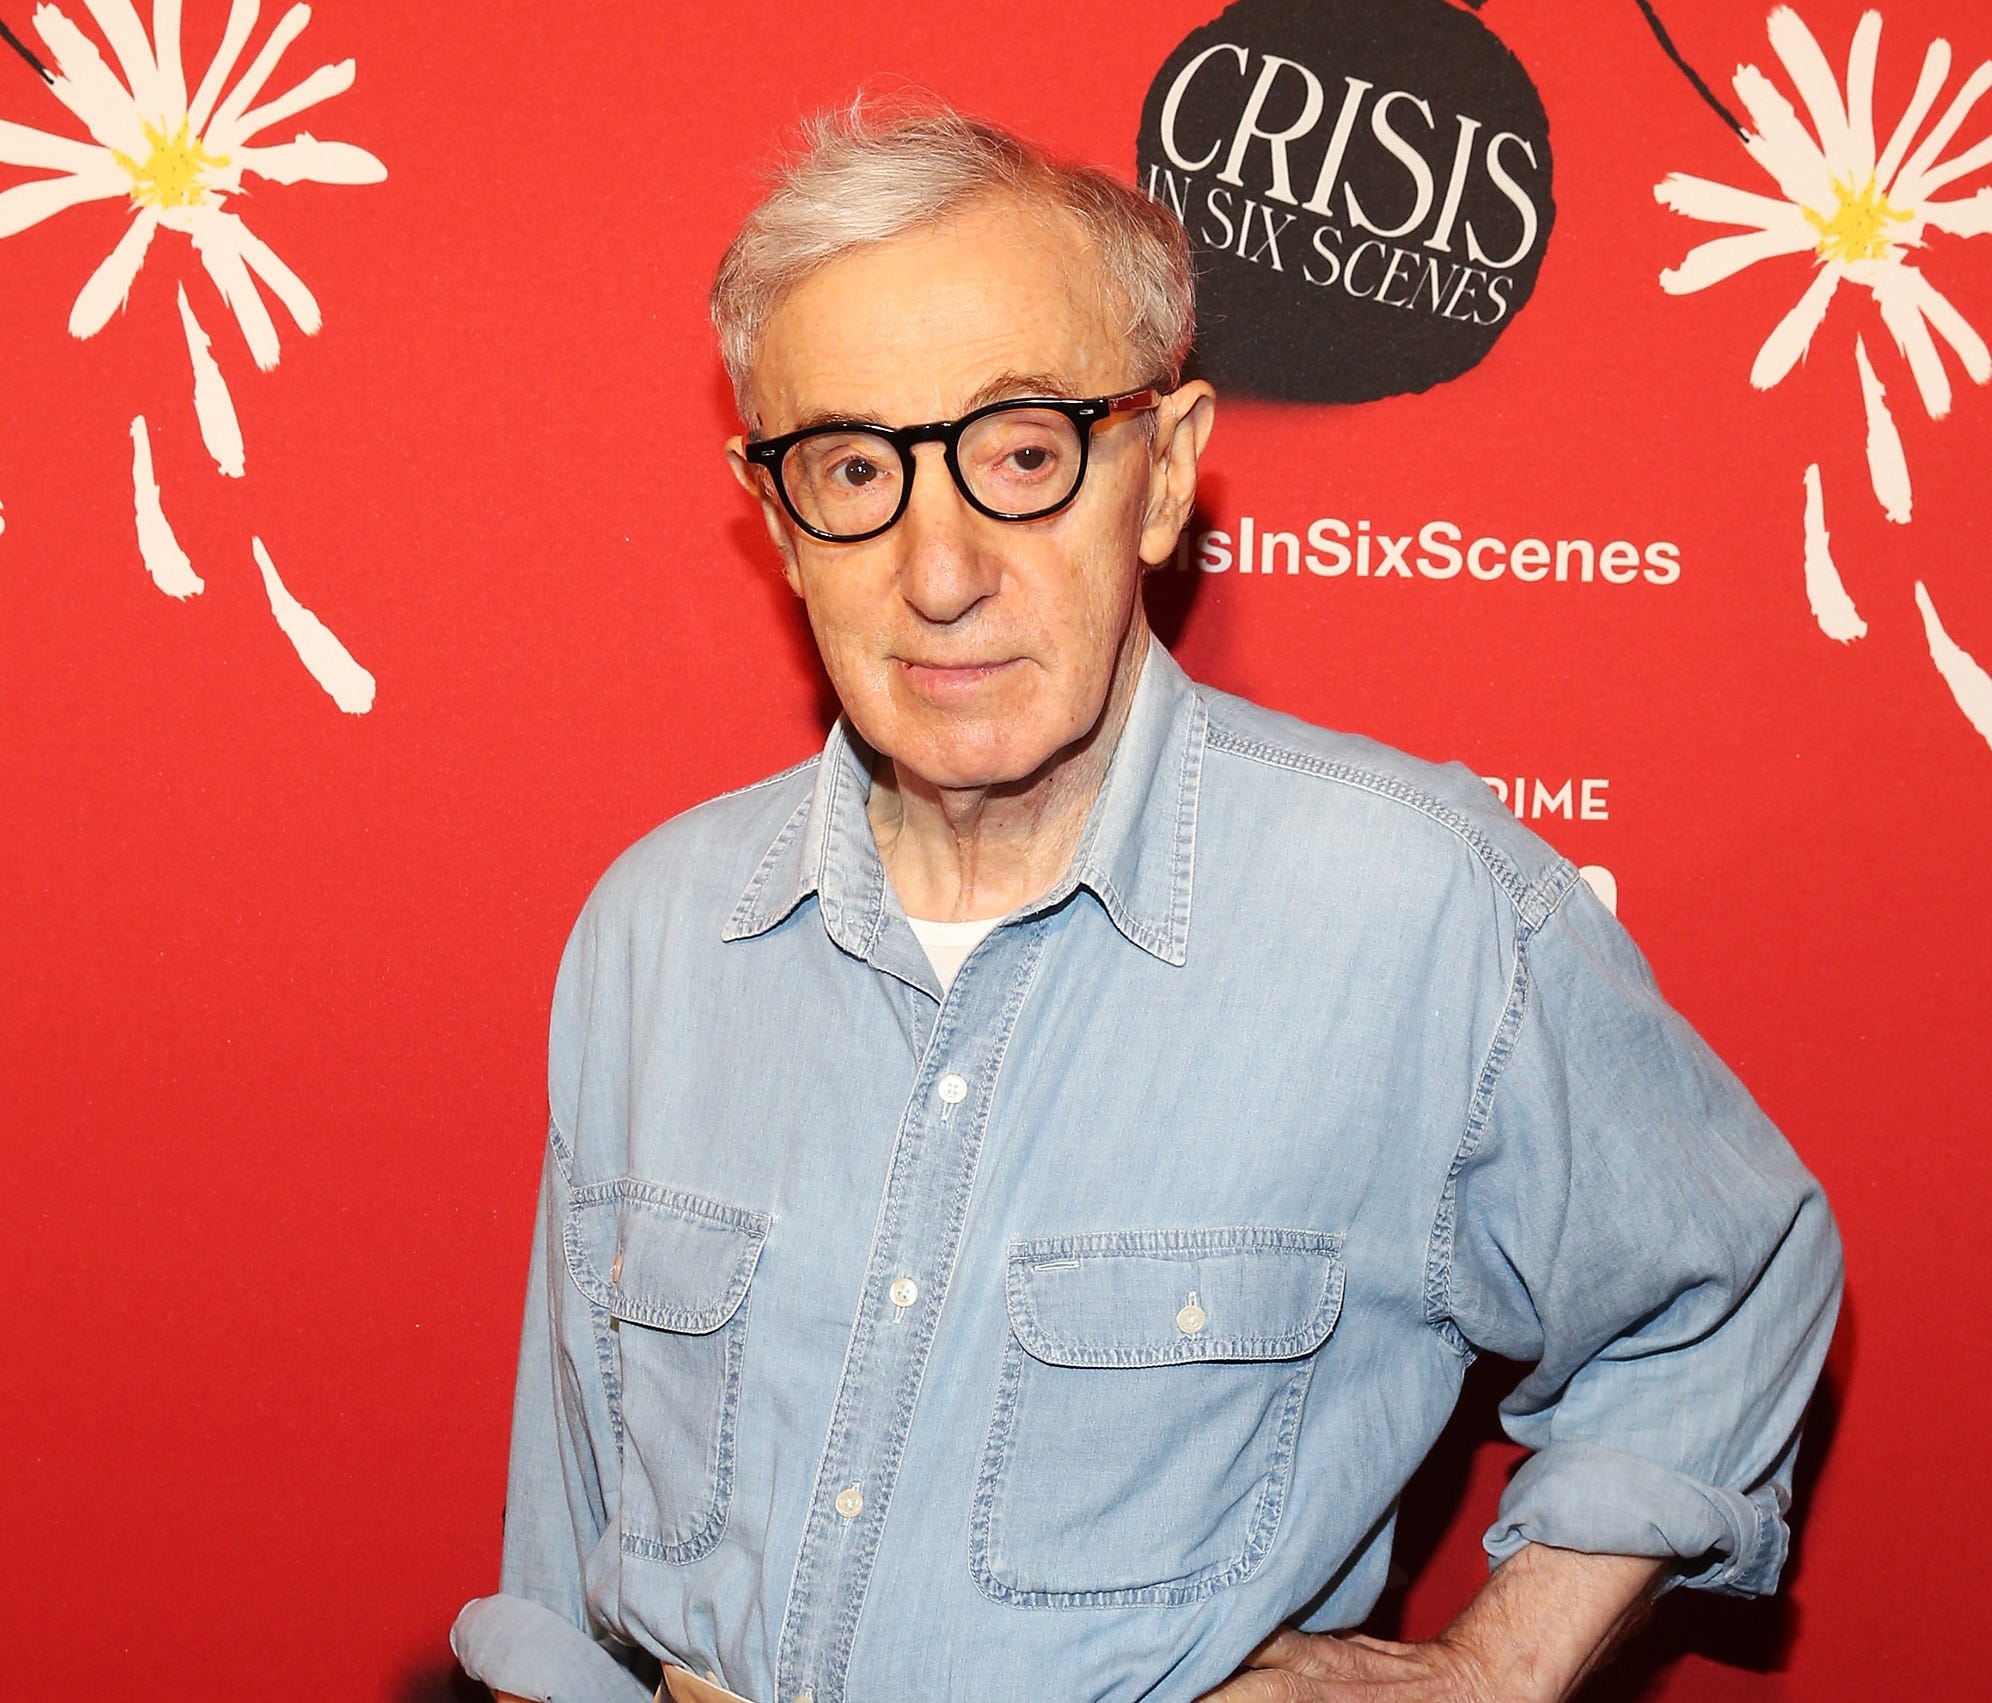 Dylan Farrow revisits her accusations of sexual abuse against her adoptive father, filmmaker Woody Allen, in a piece for the 'Los Angeles Times' published Thursday.